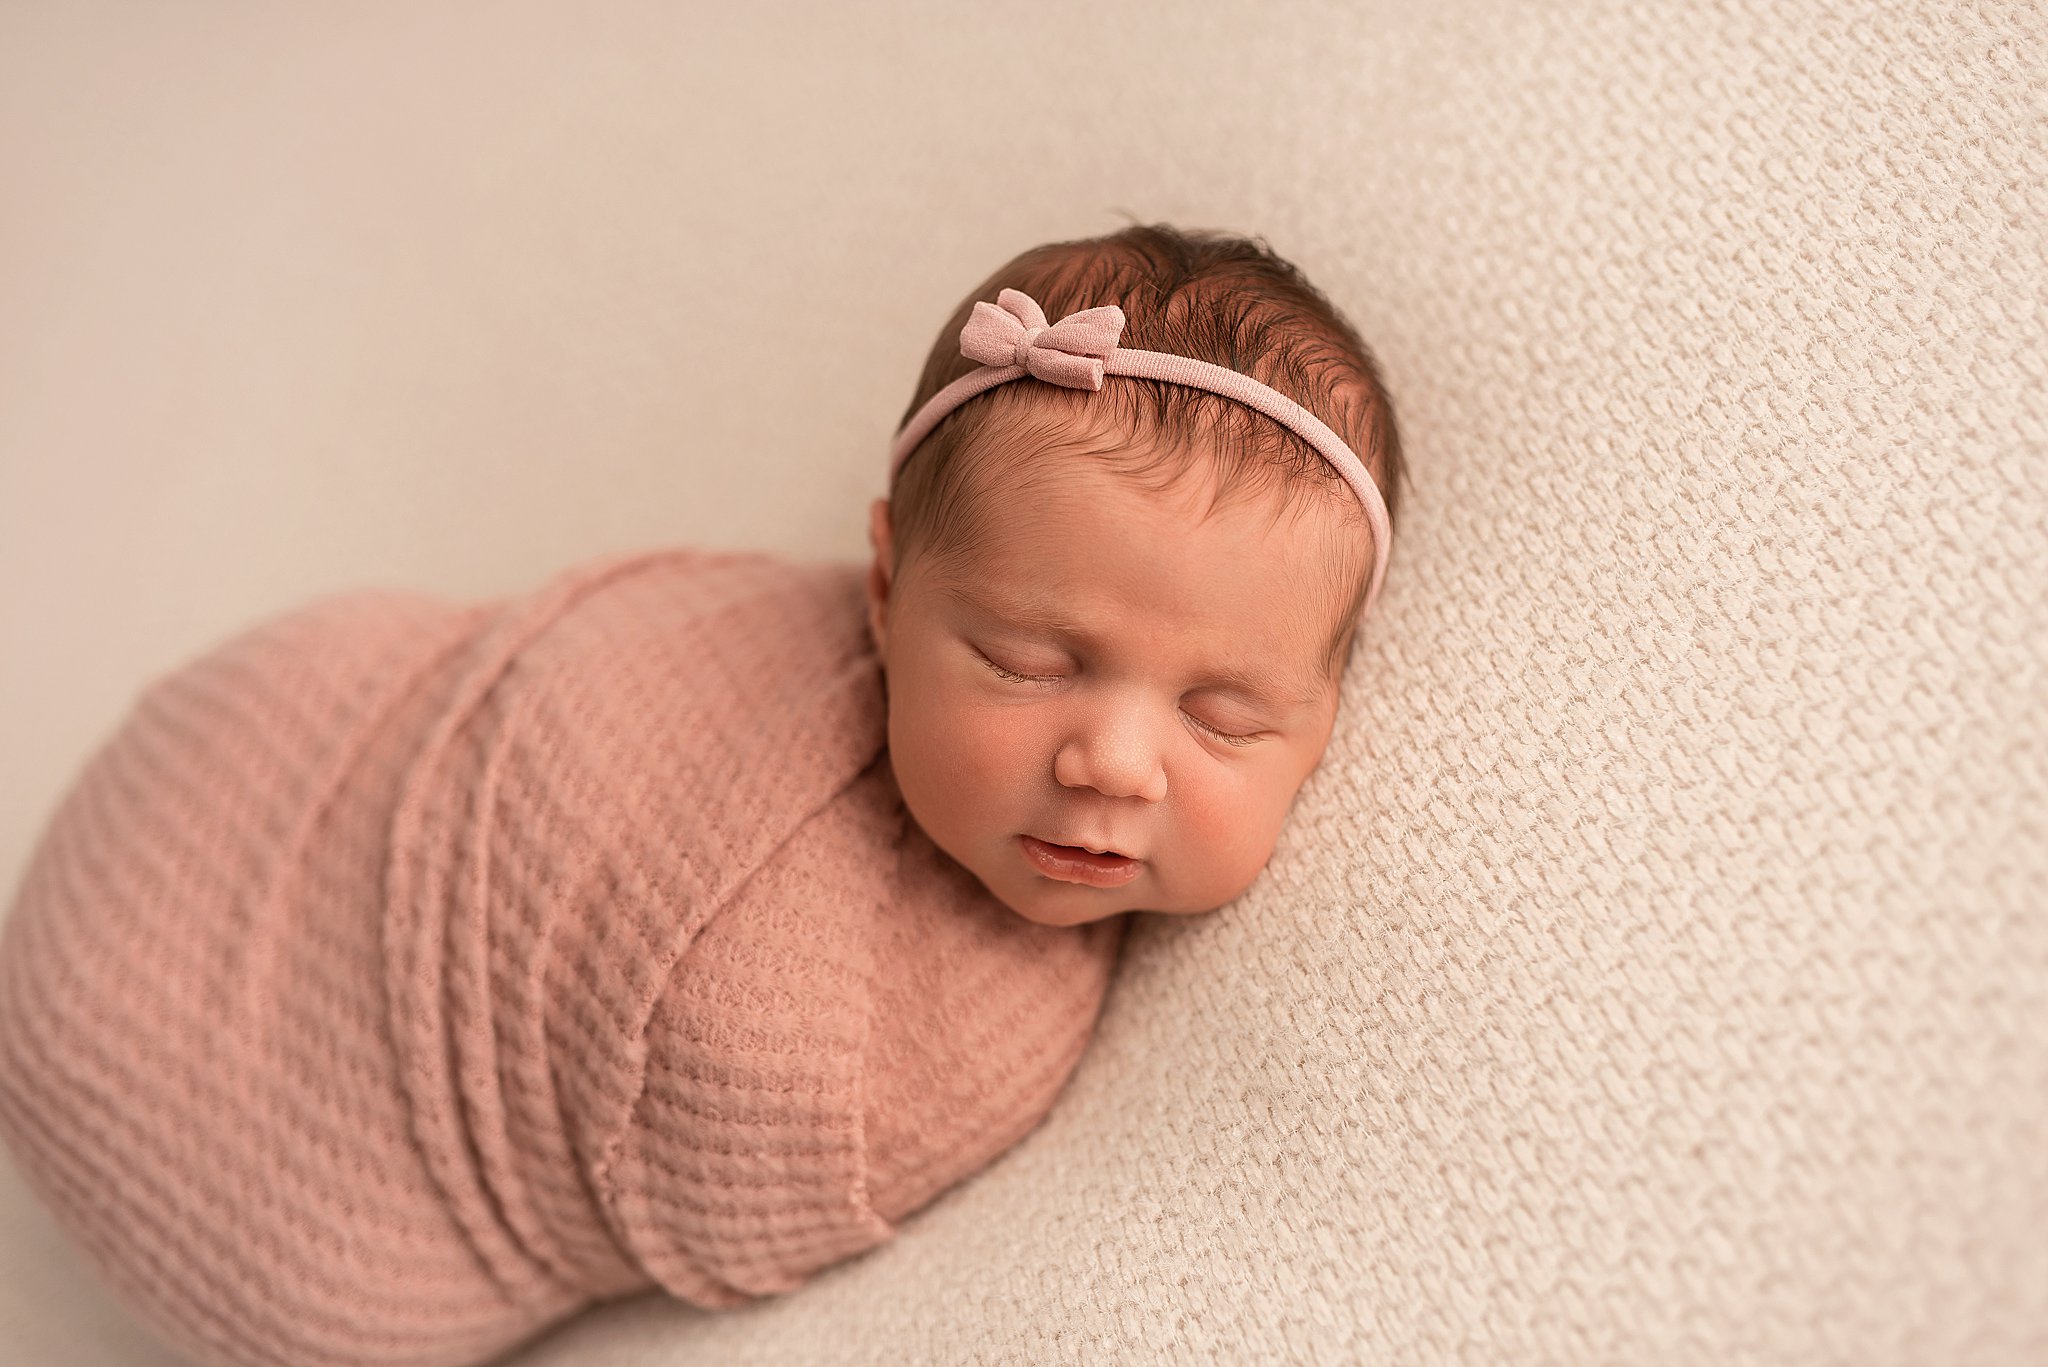 A newborn baby sleeps on a knit pad in a pink swaddle blanket